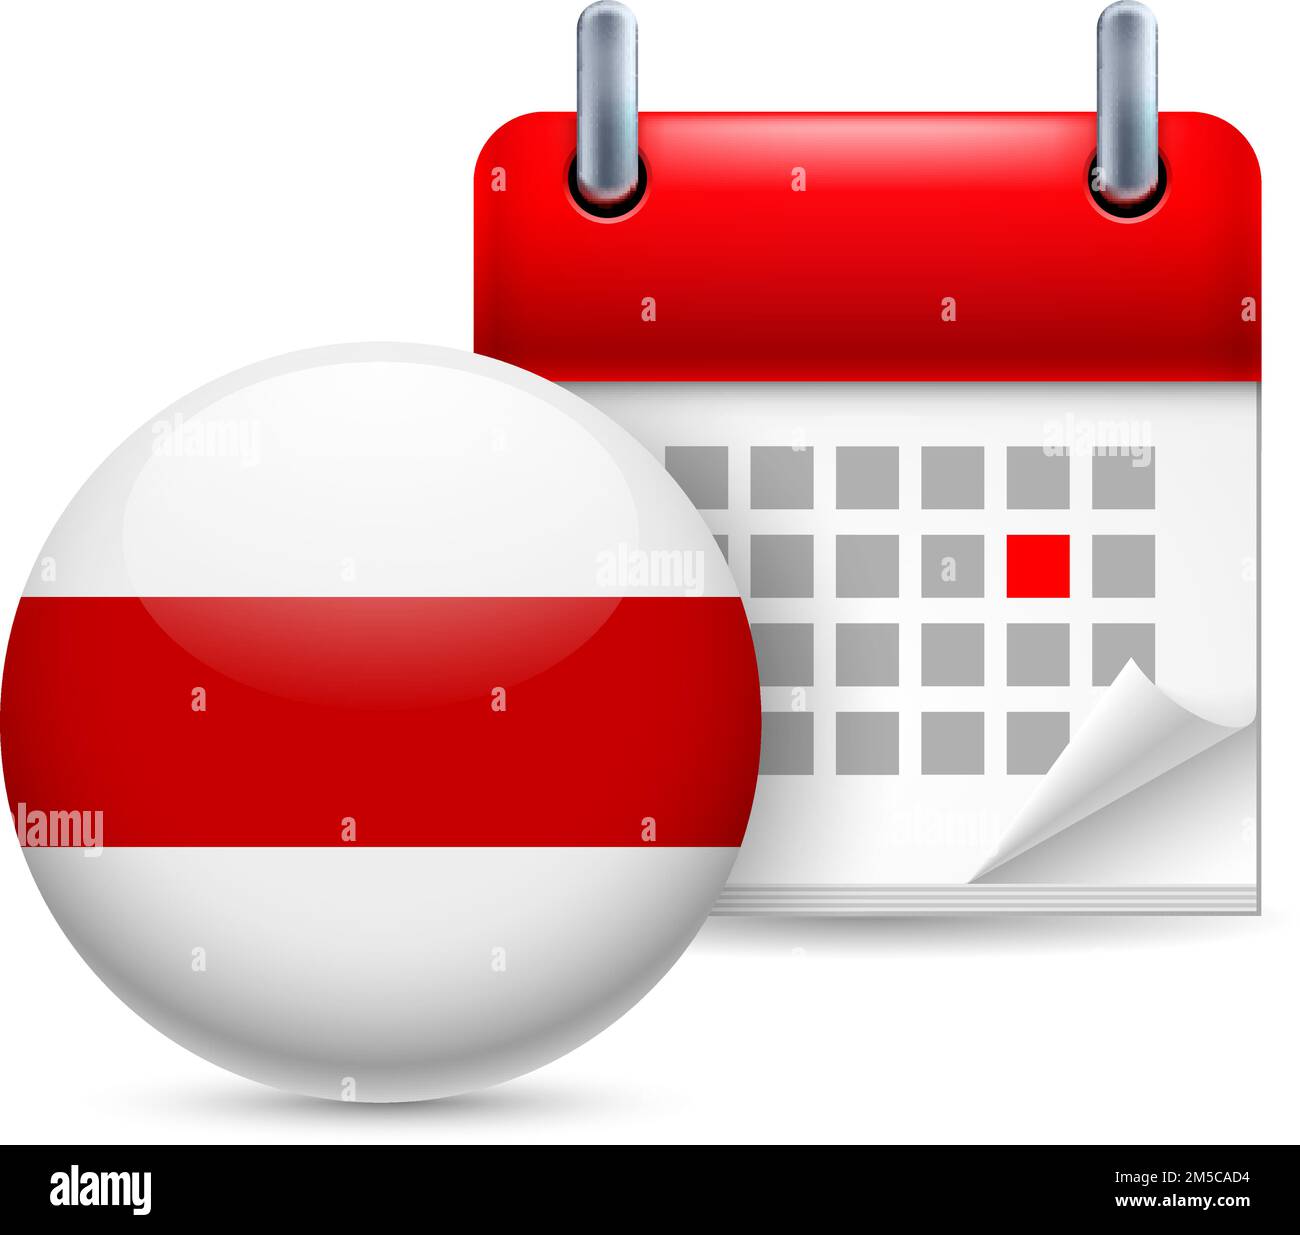 Calendar and Round Belarus Flag Icon. National Holiday Day with Badge and The Historical National Round Badge of Belarusians in White-Red-White Colors Stock Vector